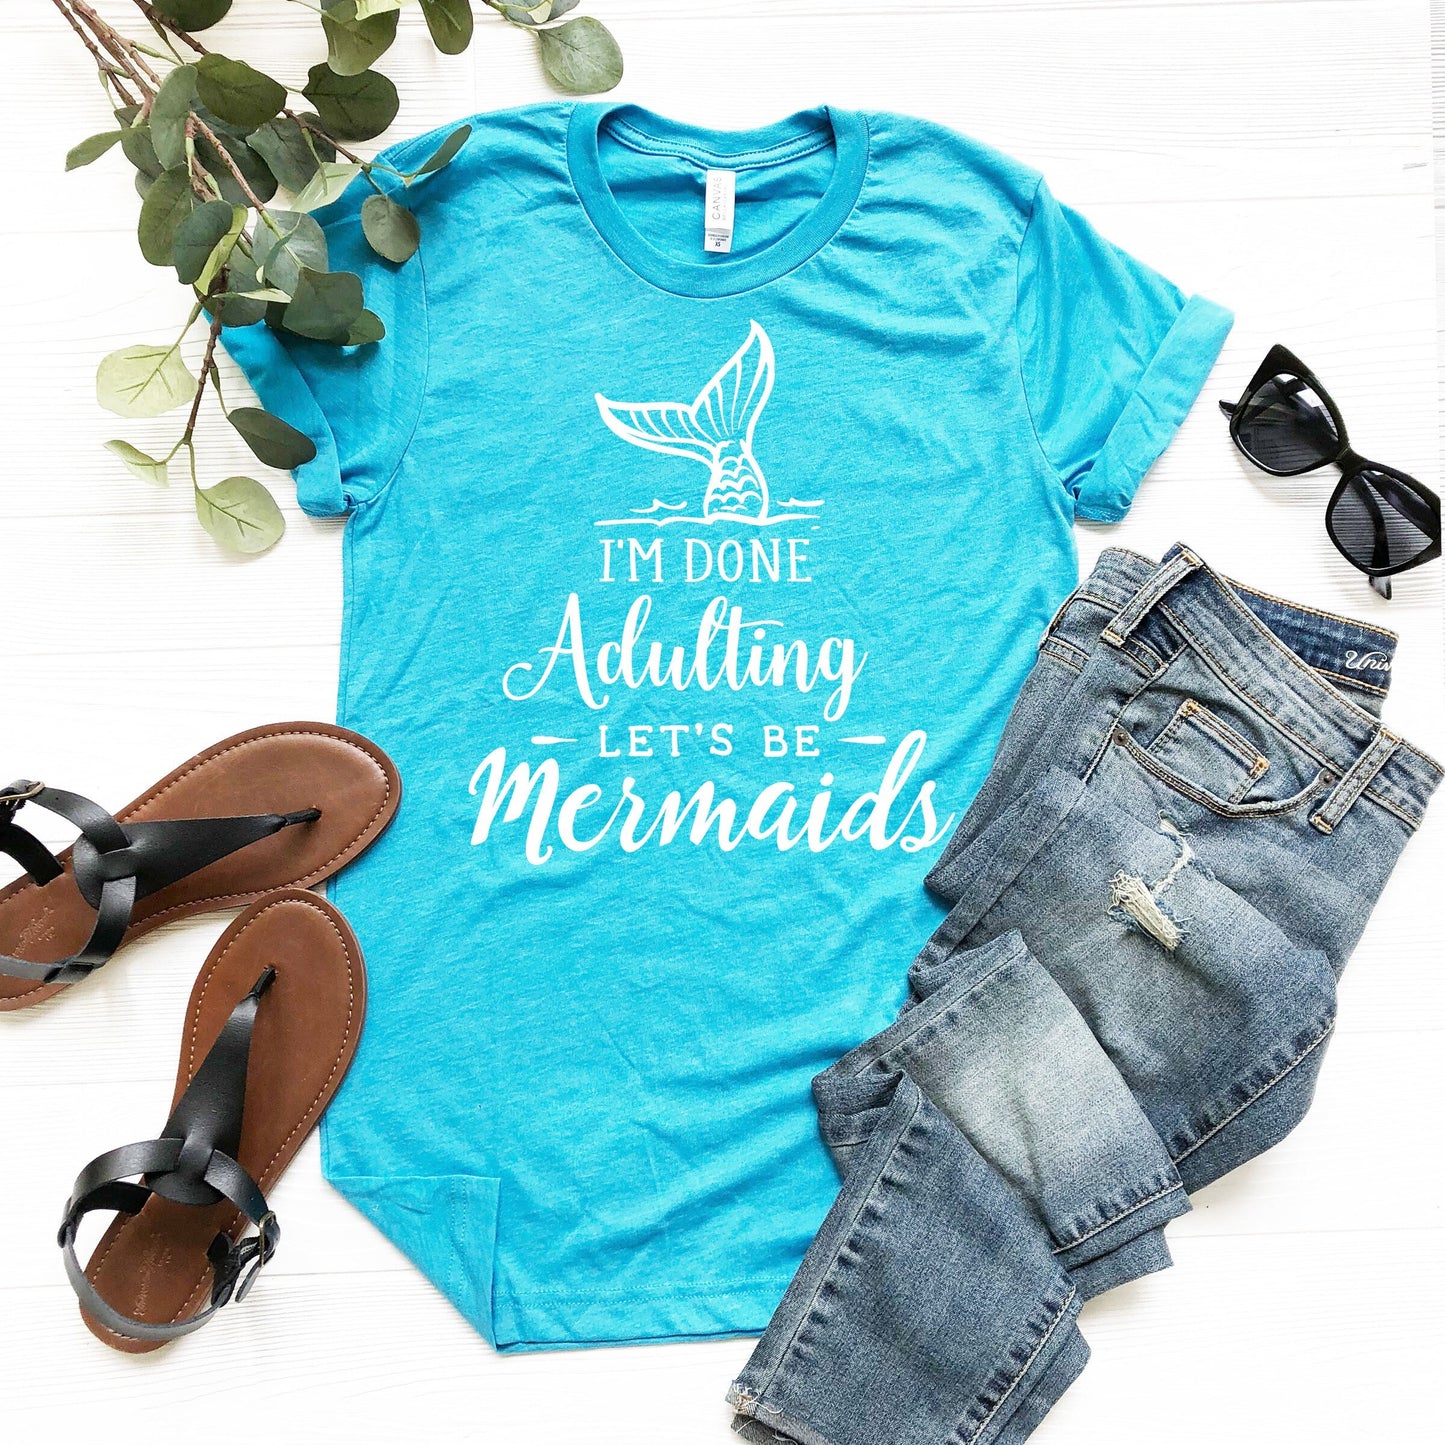 I'm Done Adulting Let's Be Mermaids Unisex Adult t-shirt - mermaid shirt - mermaid birthday - mermaid party - mermaid t-shirt